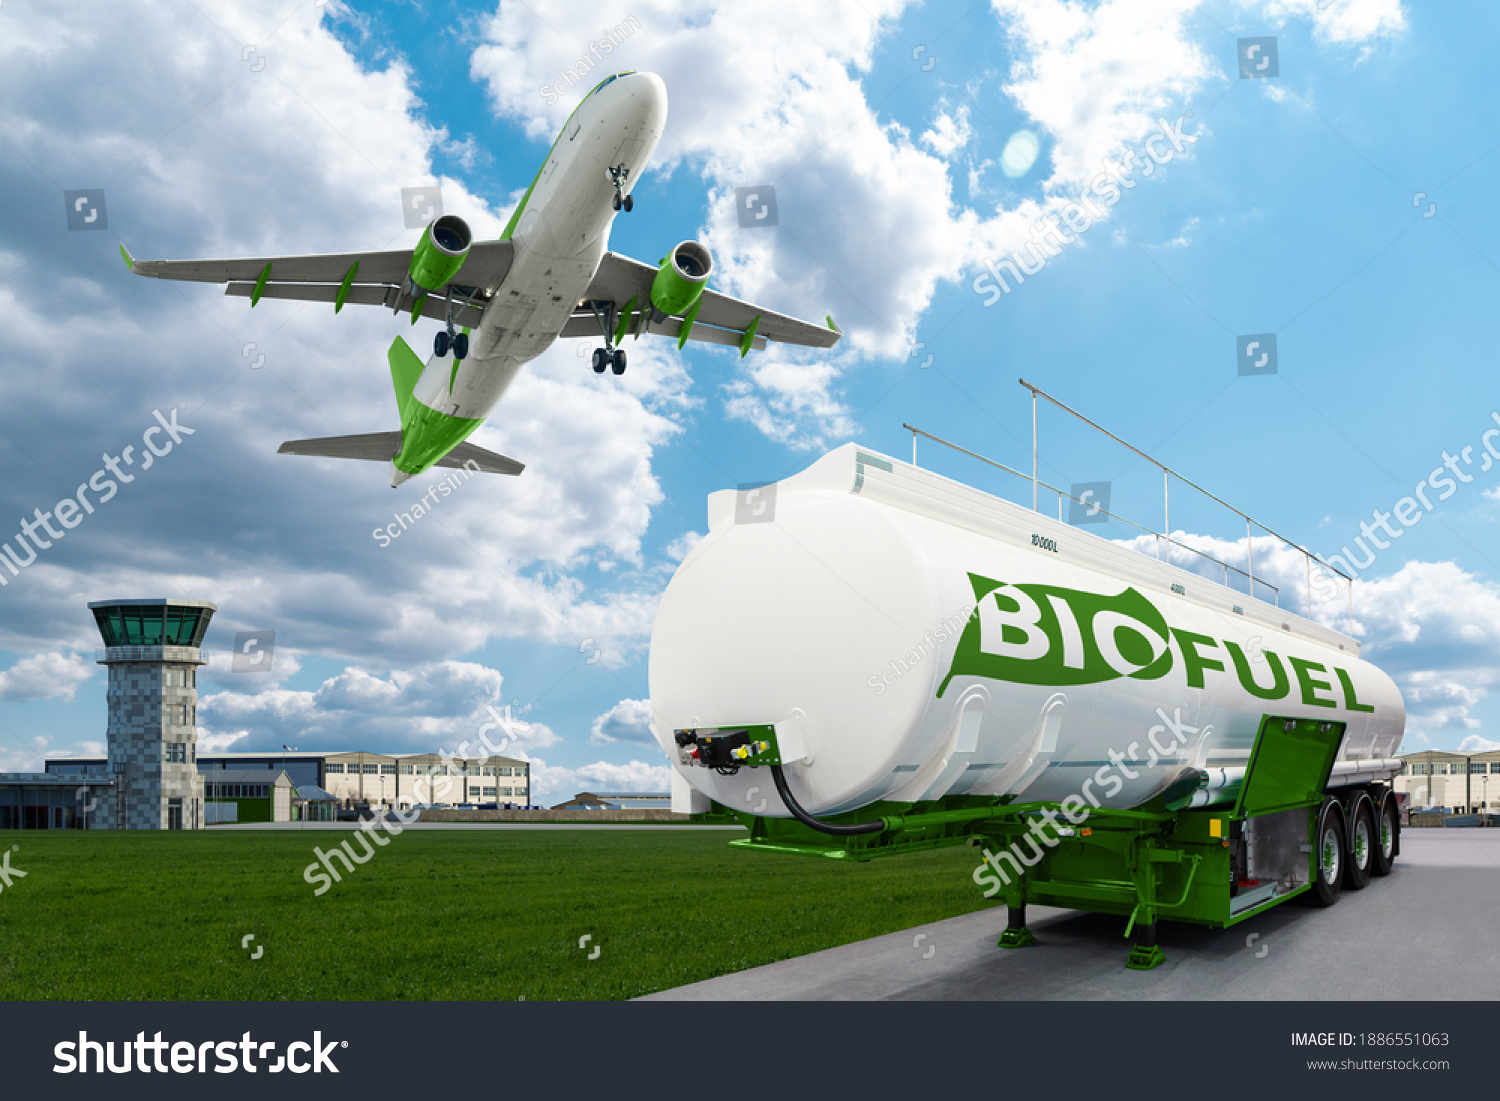 Airplane and biofuel tank trailer on the background of airport. New energy sources #1886551063